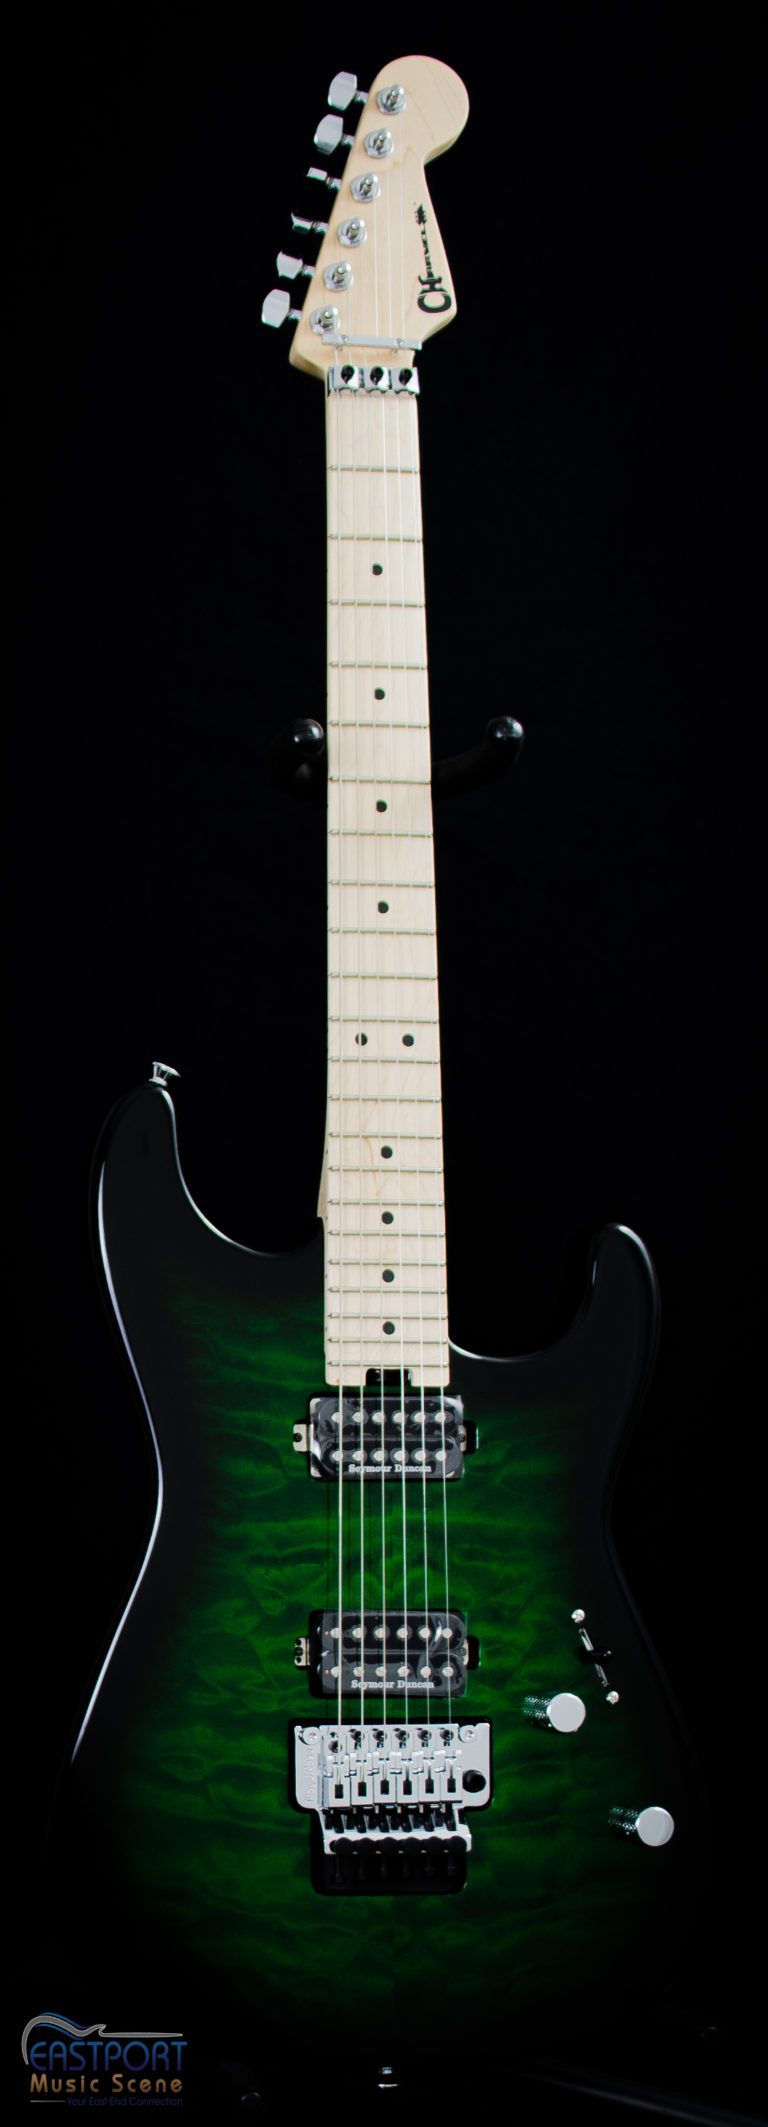 A green and black guitar is in front of a black background.